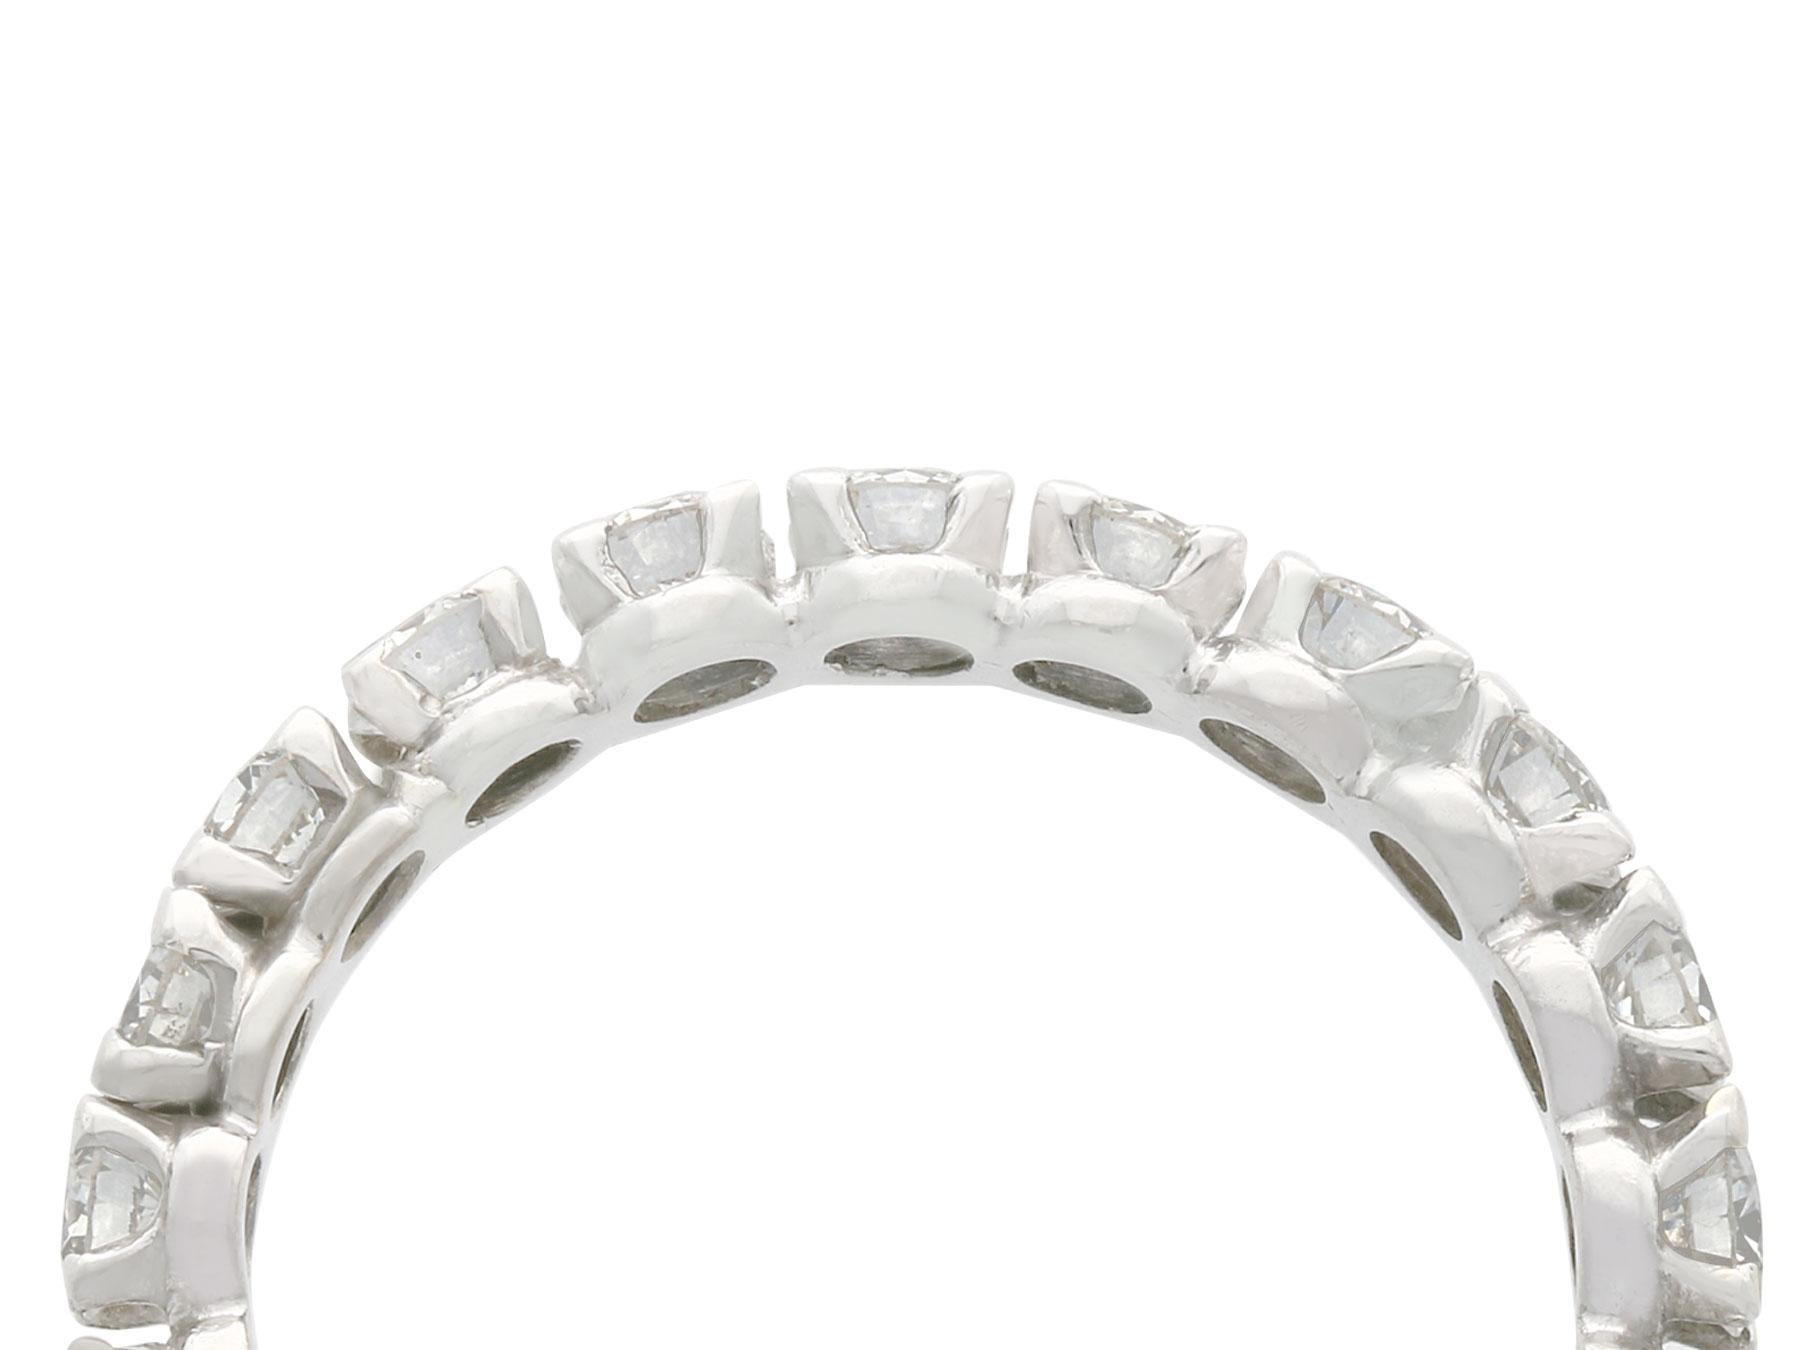 A stunning, fine, and impressive 1.68 carat diamond and platinum full eternity ring; part of our diverse vintage estate jewelry collections.

This fine and impressive vintage eternity ring has been crafted in platinum.

The full eternity ring is